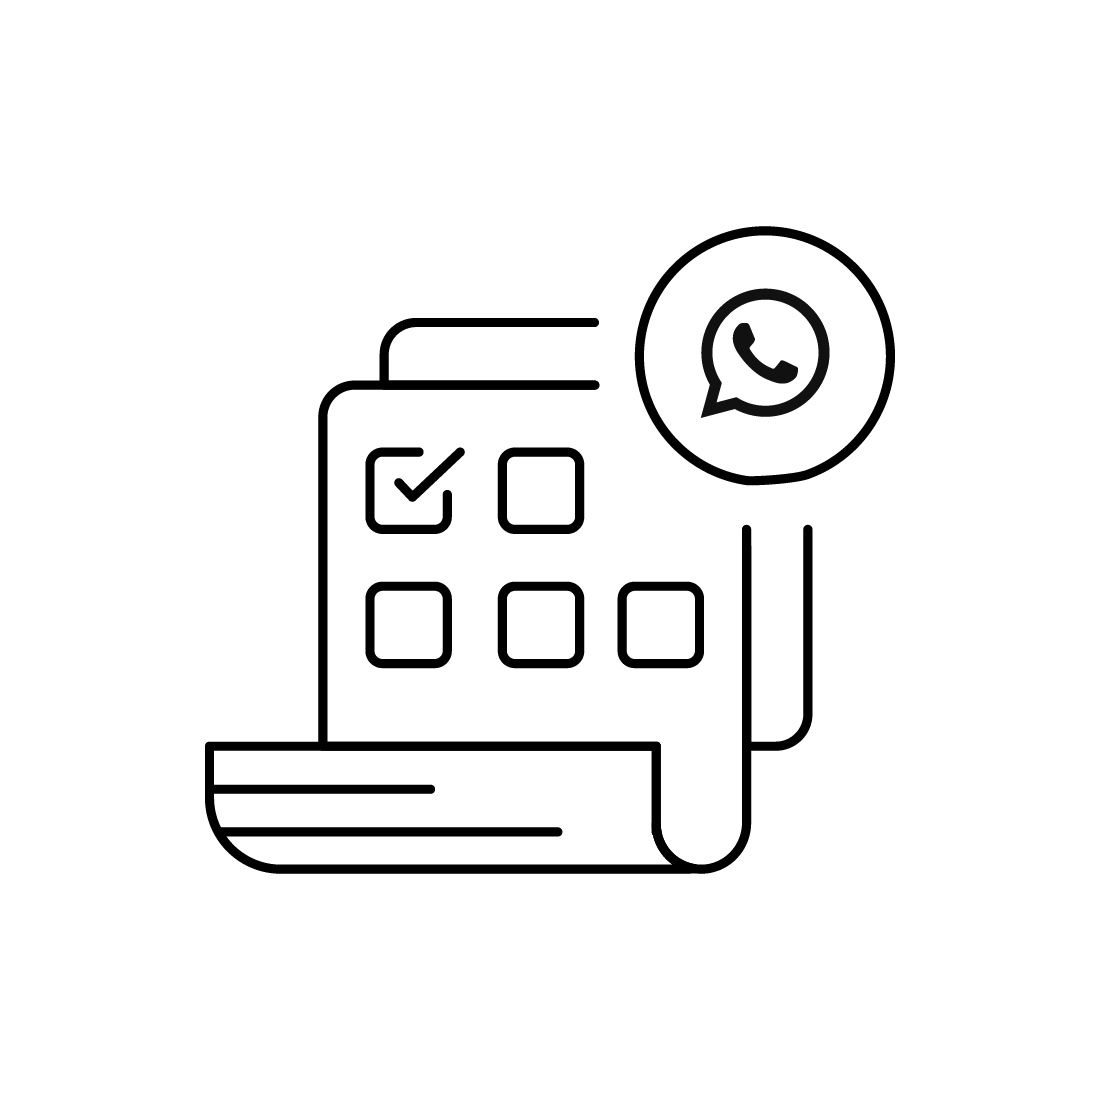 Line drawing of a phone with a question mark.